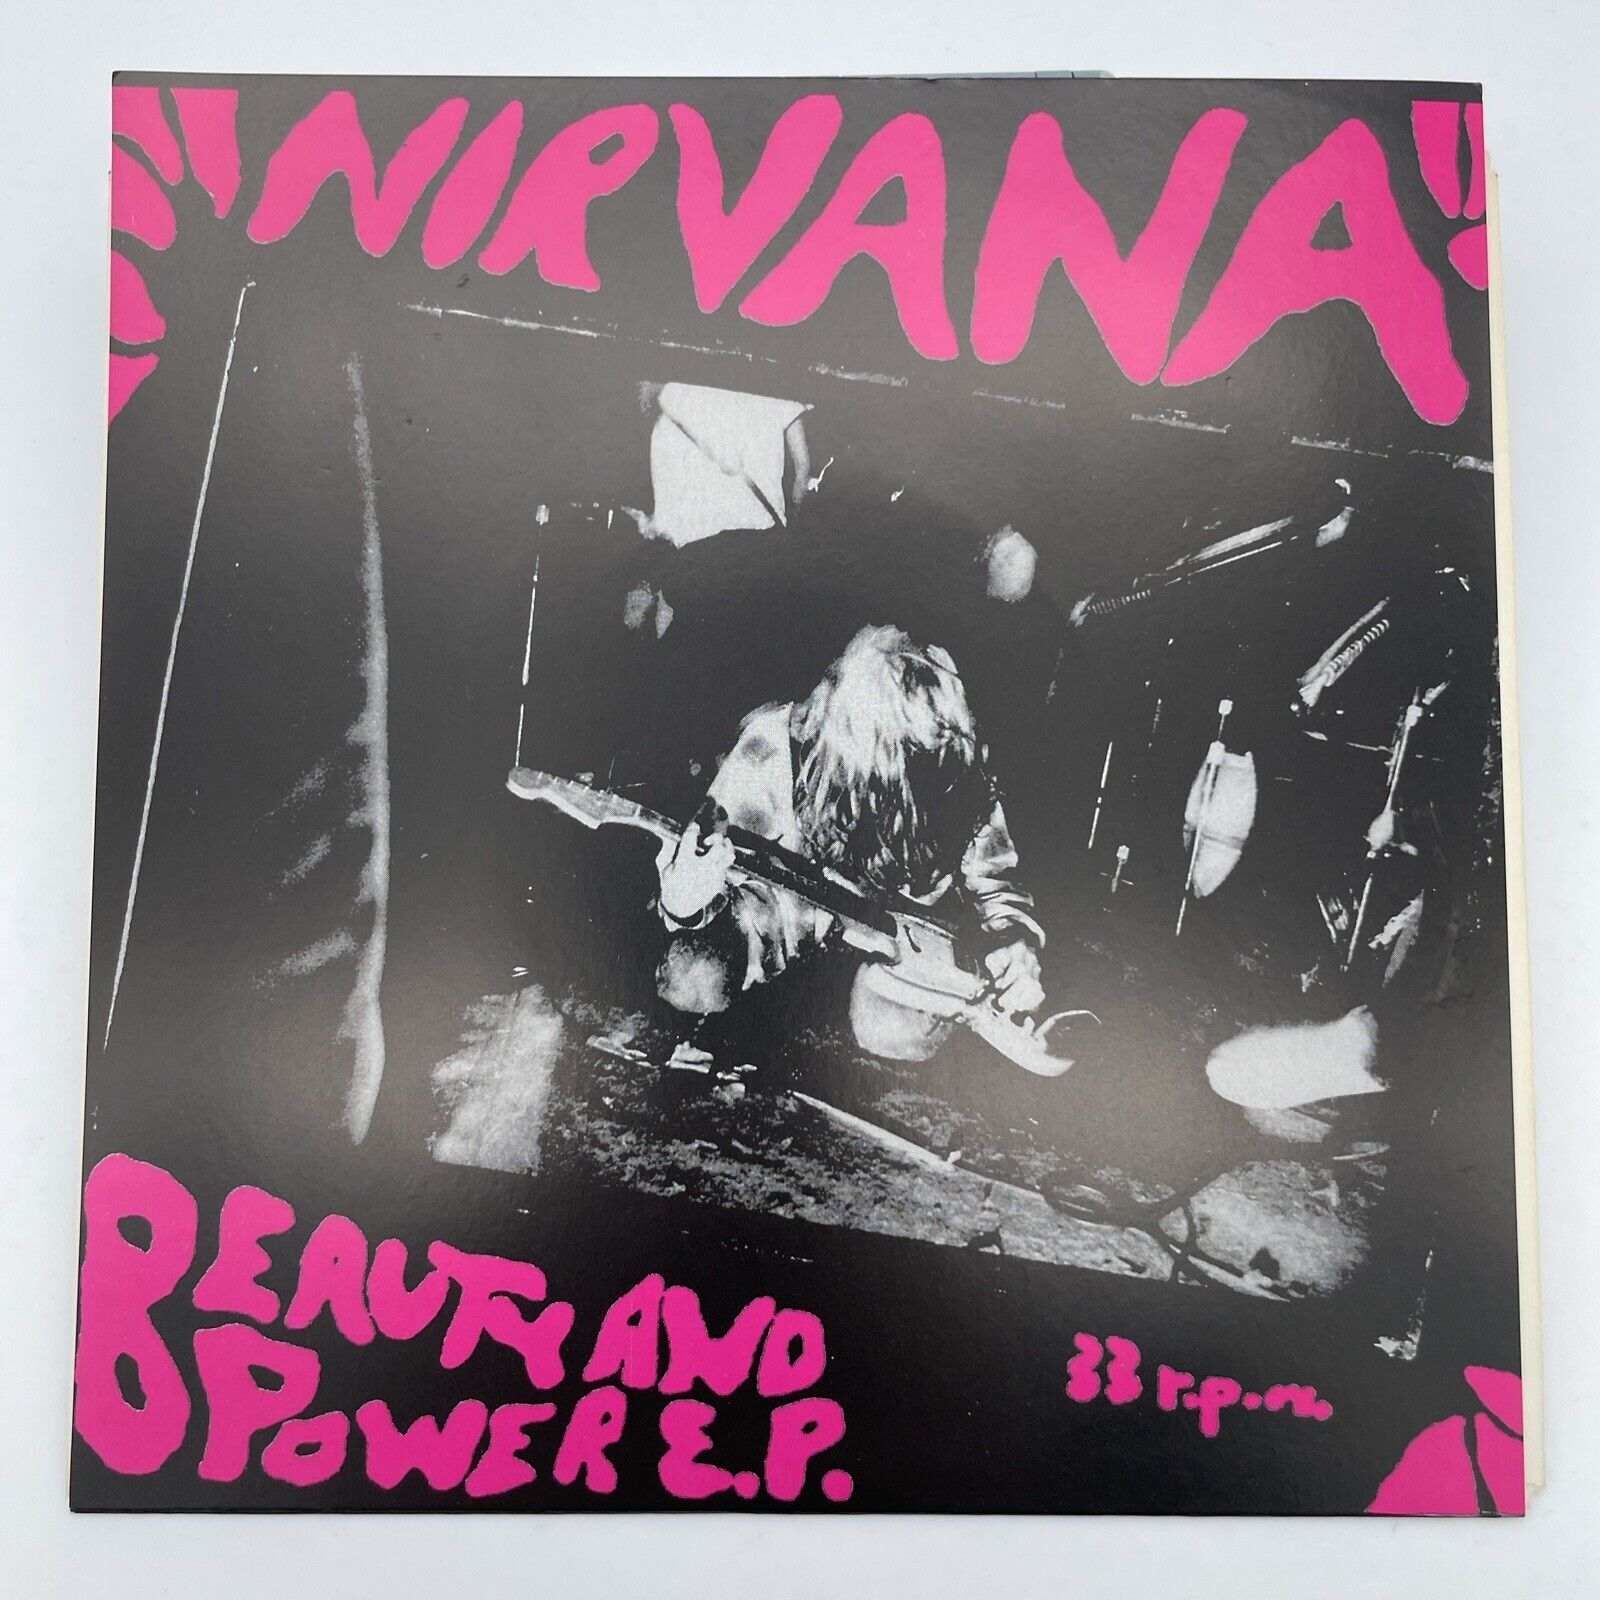 Nirvana Beauty and Power EP 1991 Pink with White label vinyl Very Good Condition